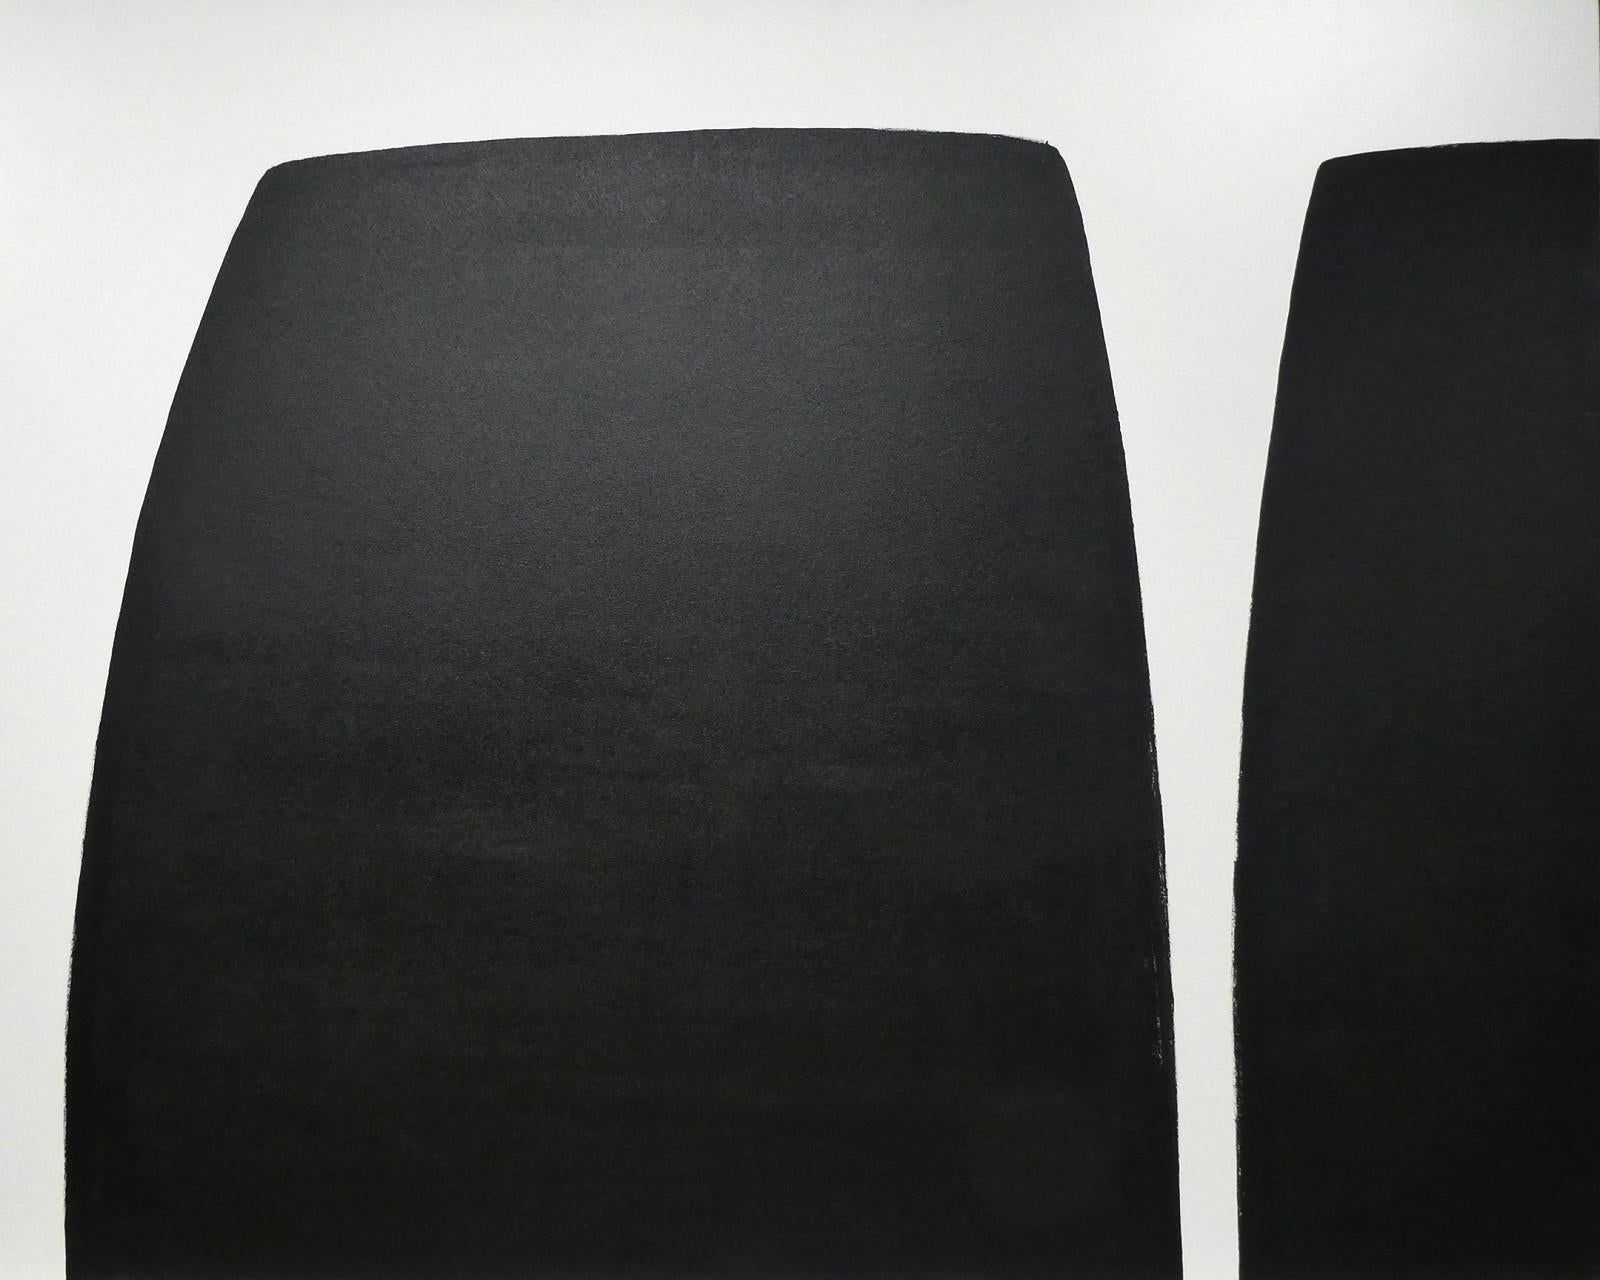 Marker 01 02 - black and white, abstract minimalist, diptych, acrylic on canvas - Post-Minimalist Painting by Tim Forbes